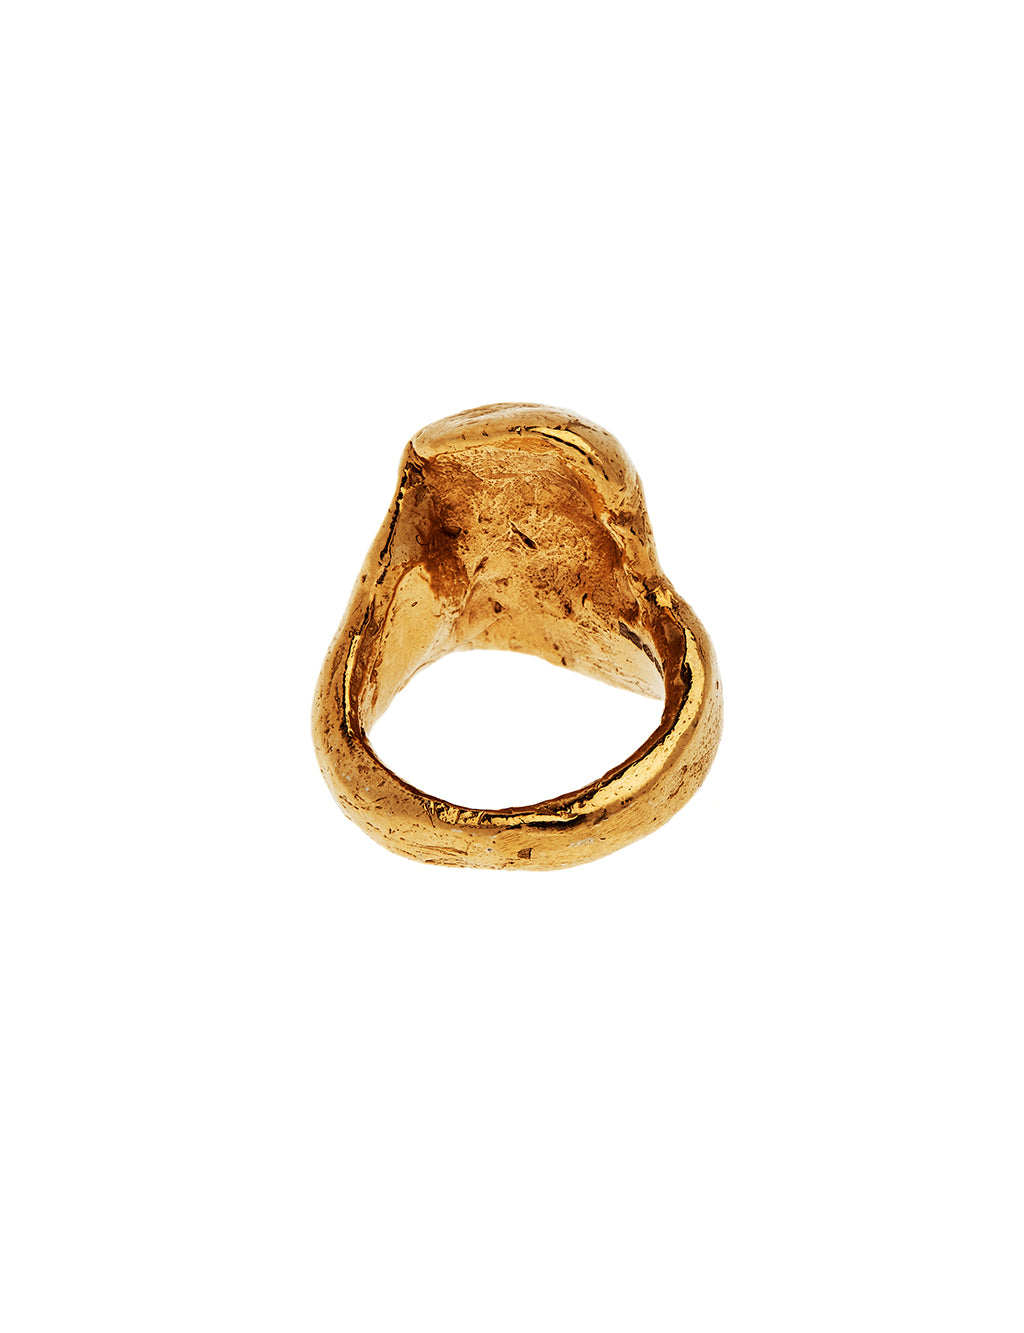 Gold vermeil textured ring showing the back band of ring